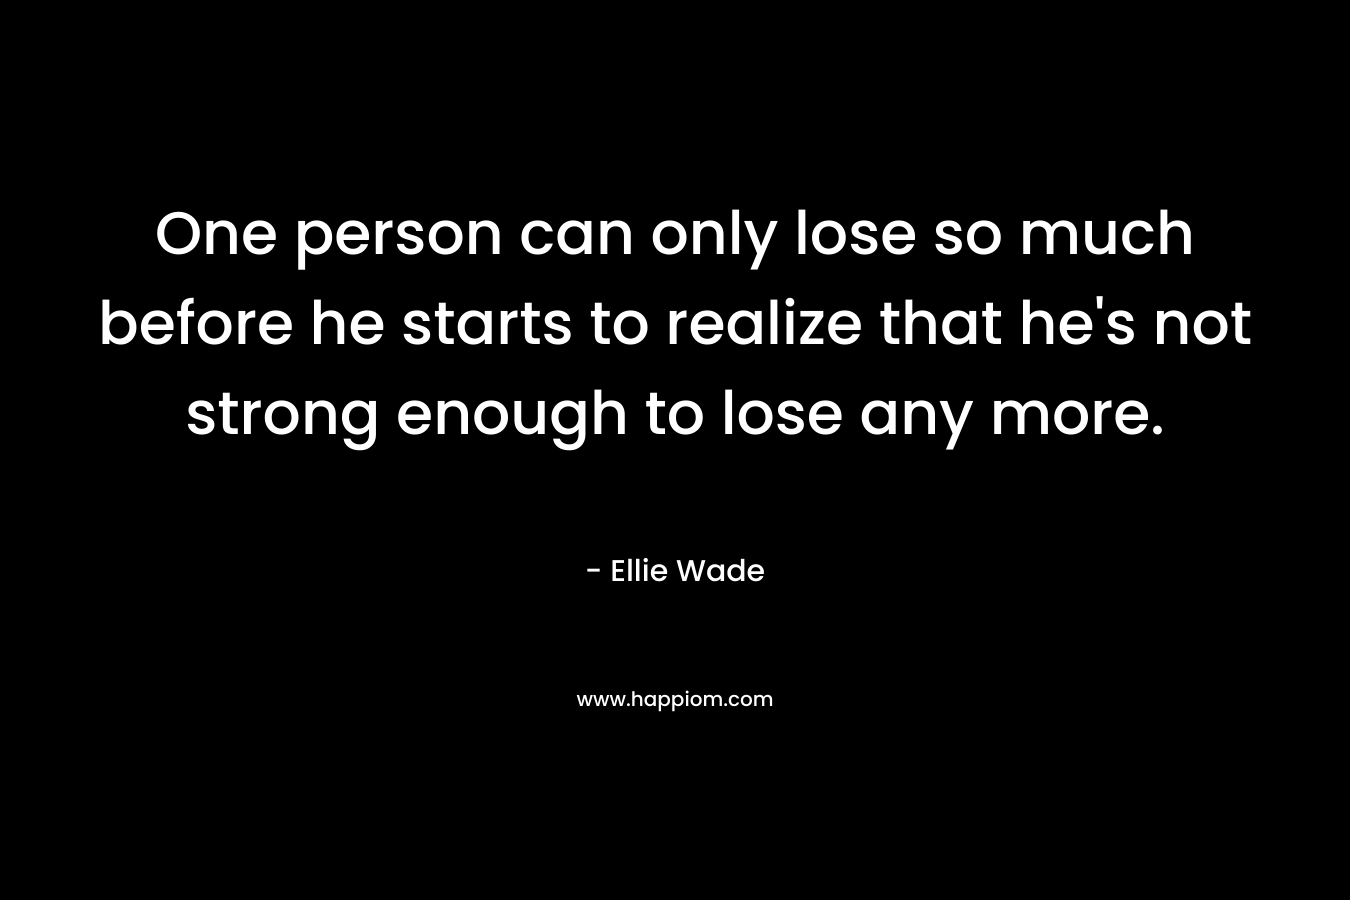 One person can only lose so much before he starts to realize that he's not strong enough to lose any more.